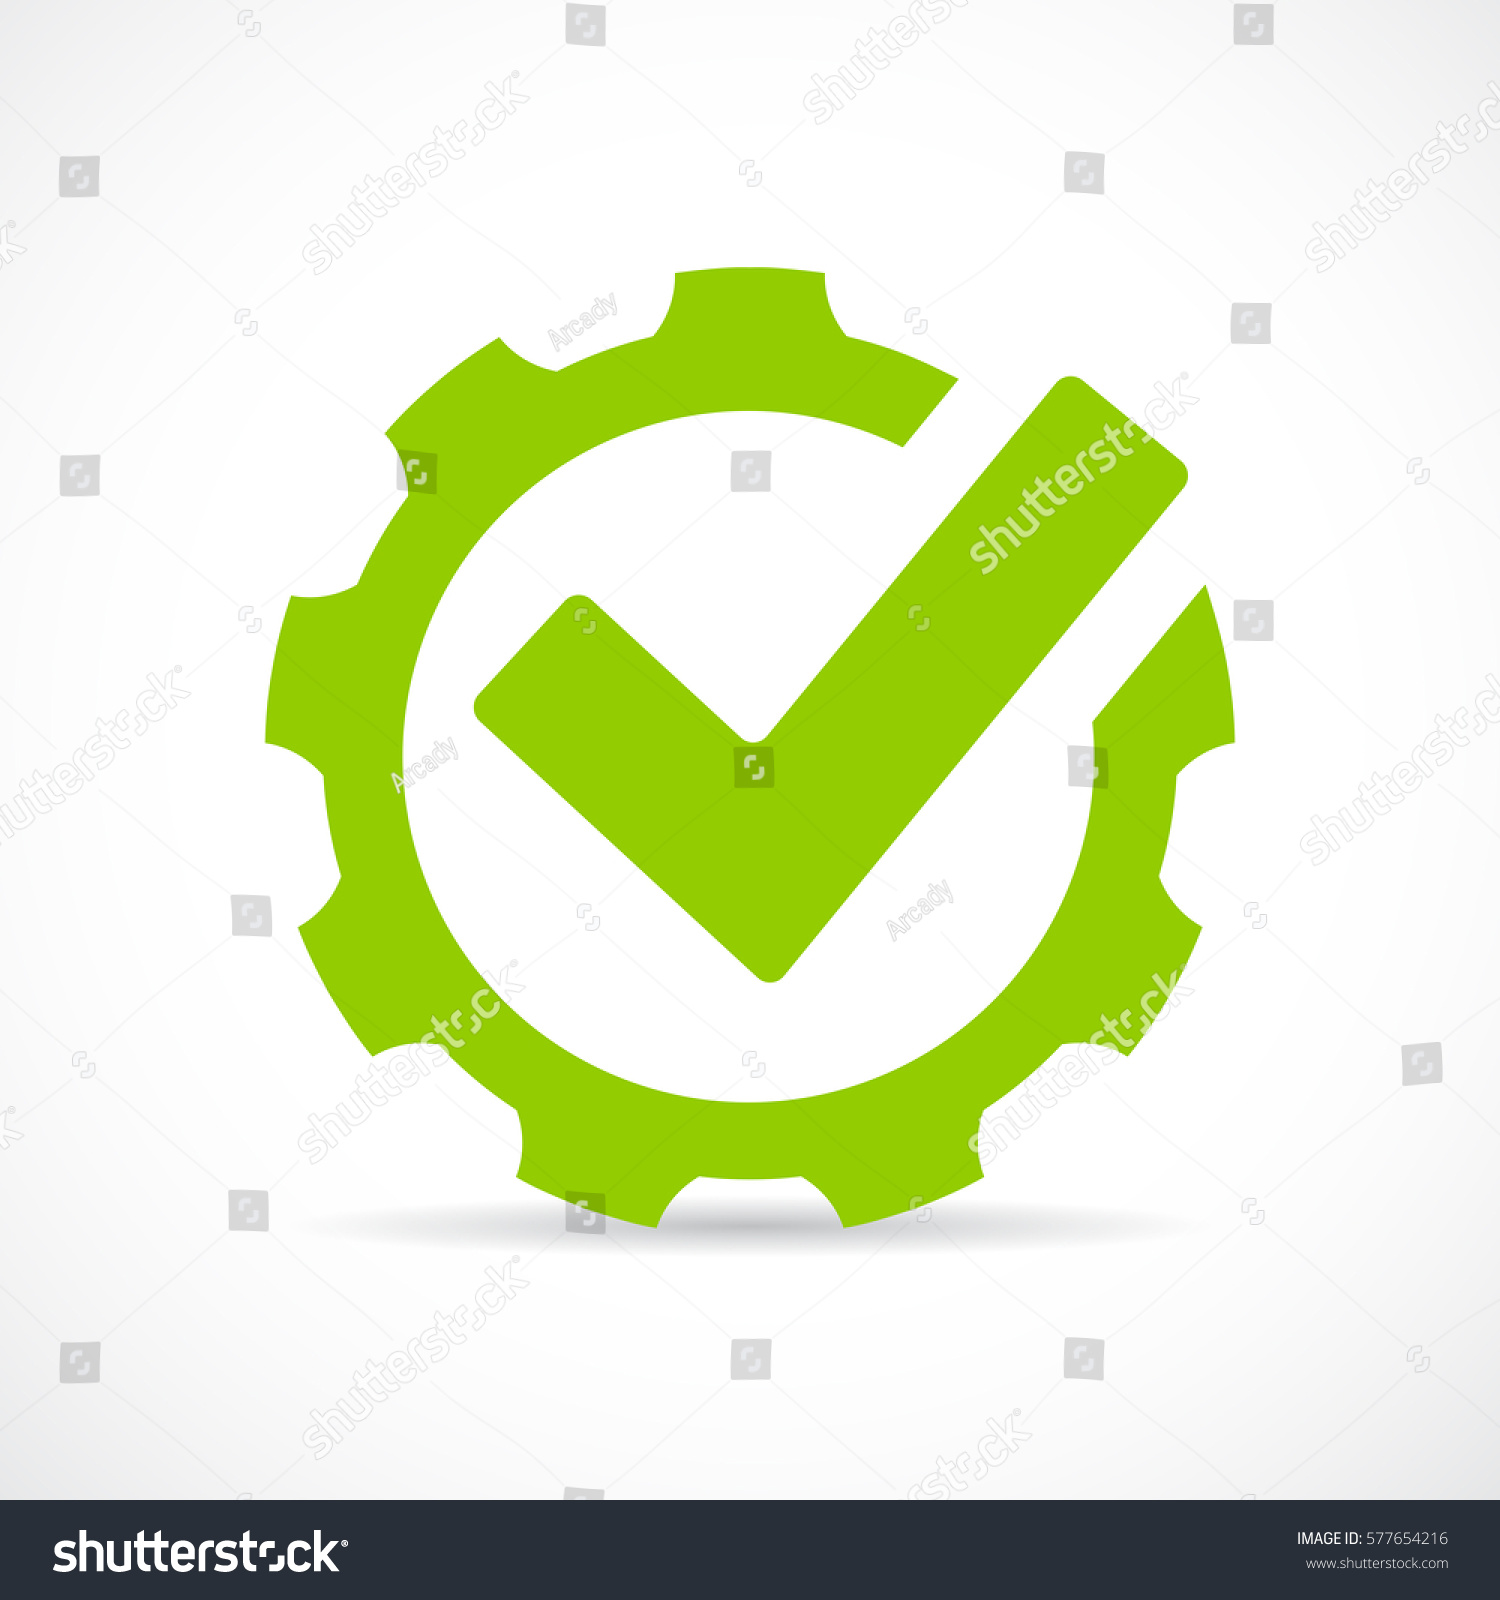 Abstract technical vector icon illustration on white background. Tick gear eps vector sign. #577654216